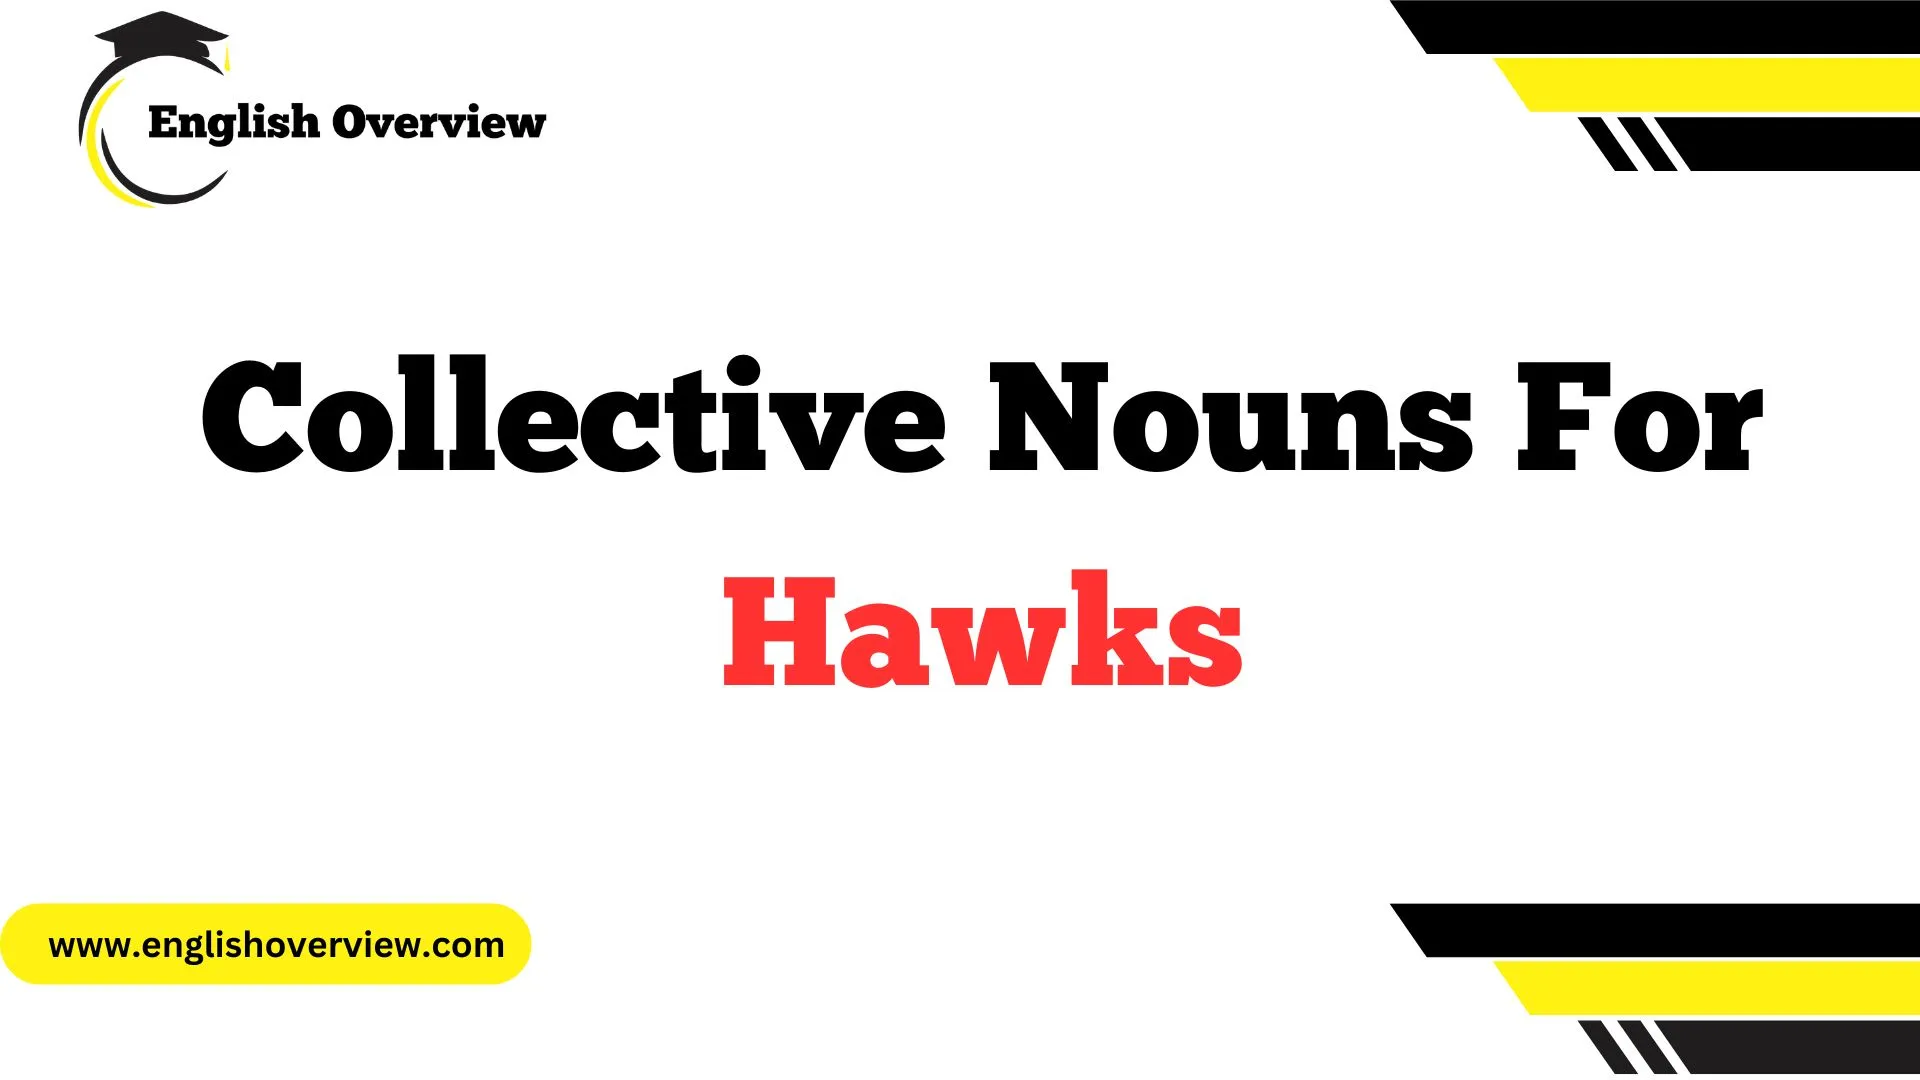 Collective Nouns For Hawks